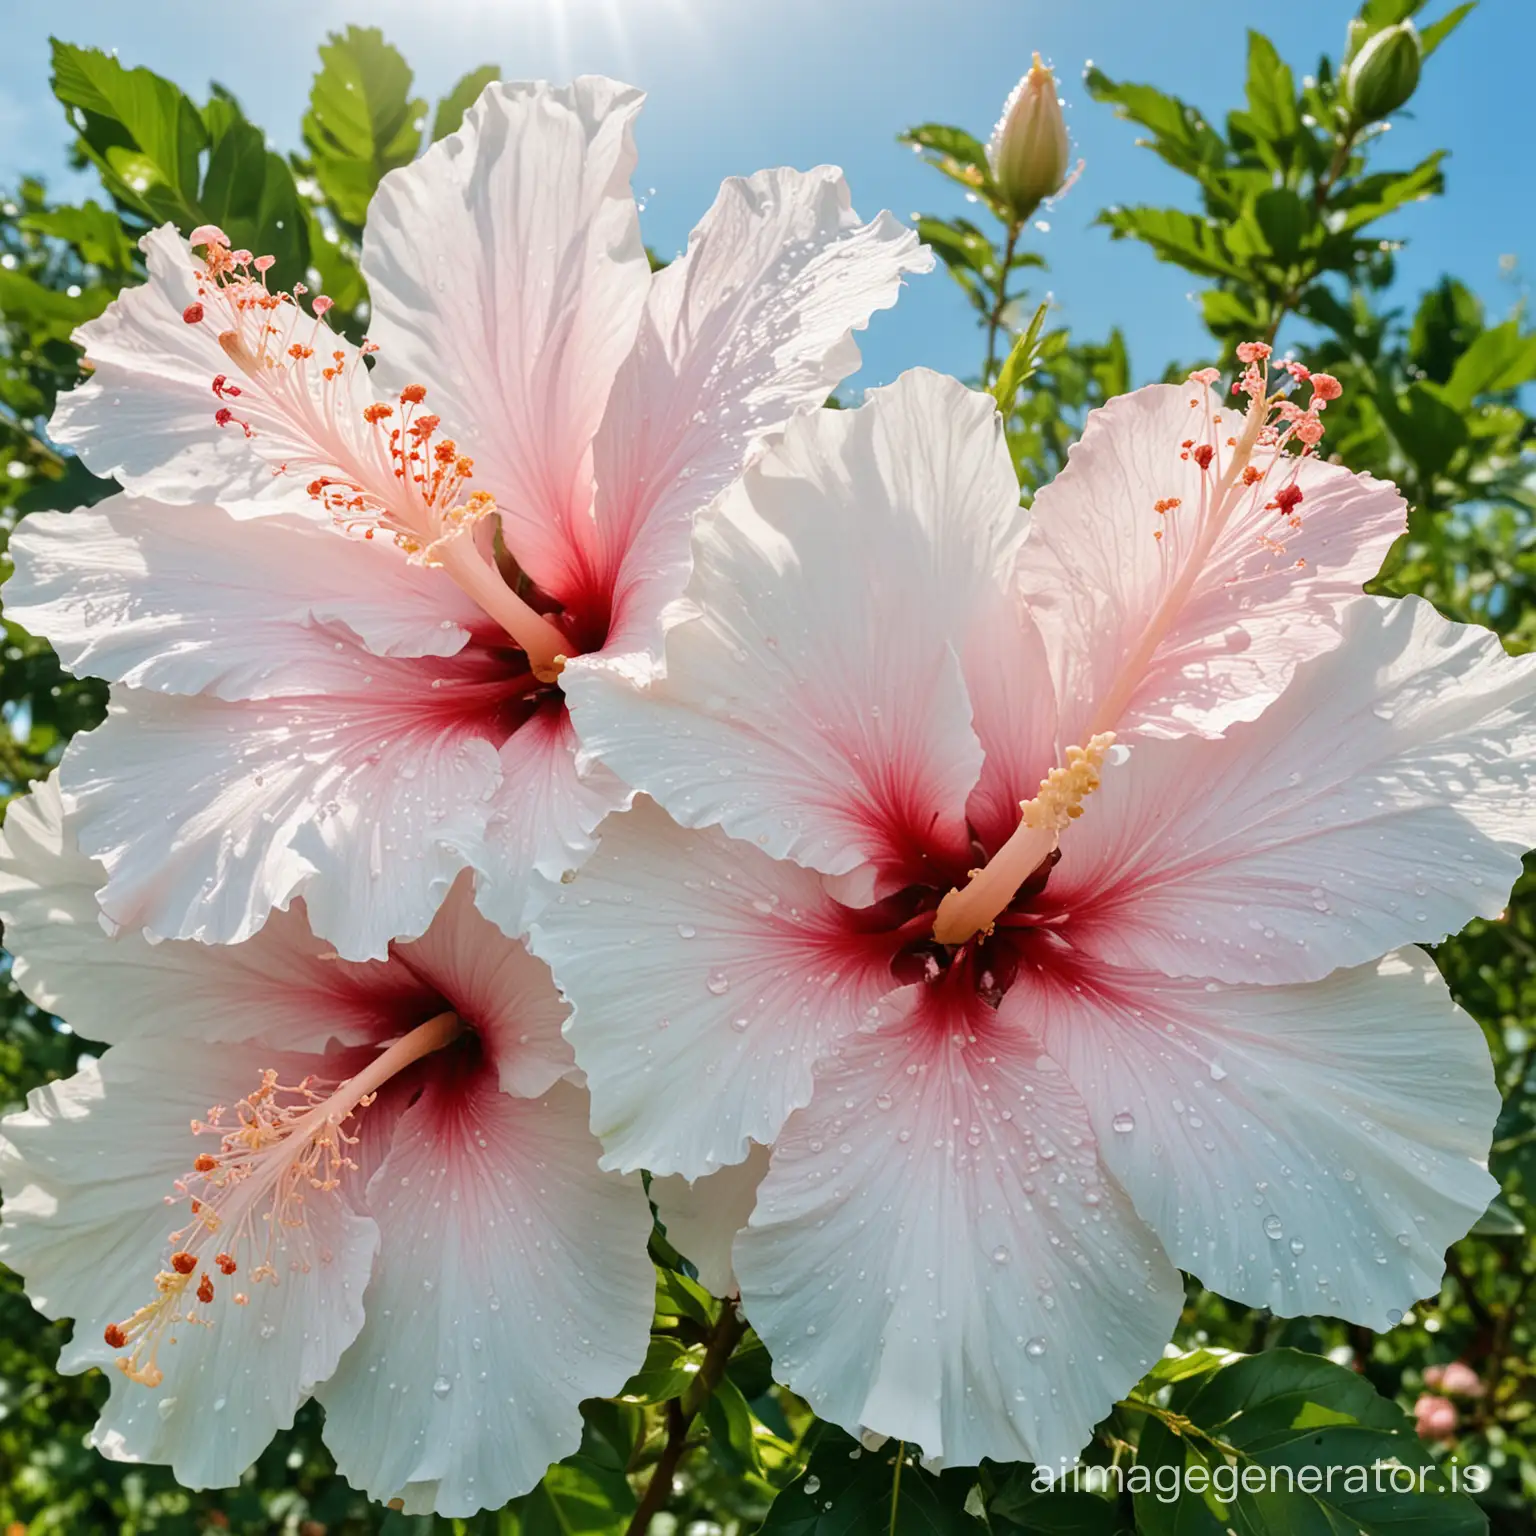 Photography of a cluster  of delicate hibiscus white flower with soft pink streaks, highlighted by glistening water droppelest on the petals,set against a backdrop or luah green foliage and clear blue sky